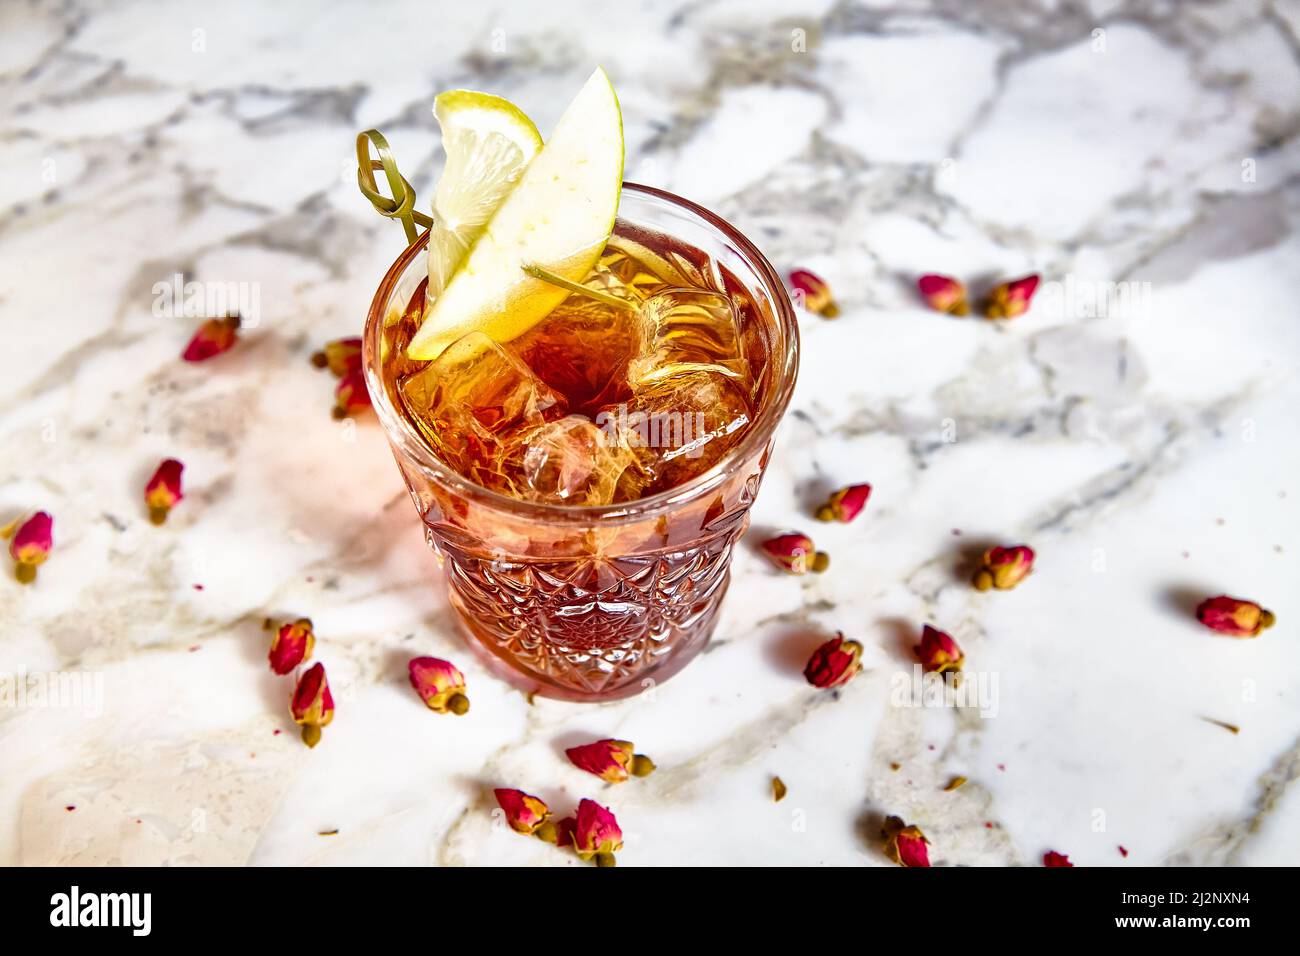 Cocktail with cognac in a glass of old fashion on the bar. Stock Photo